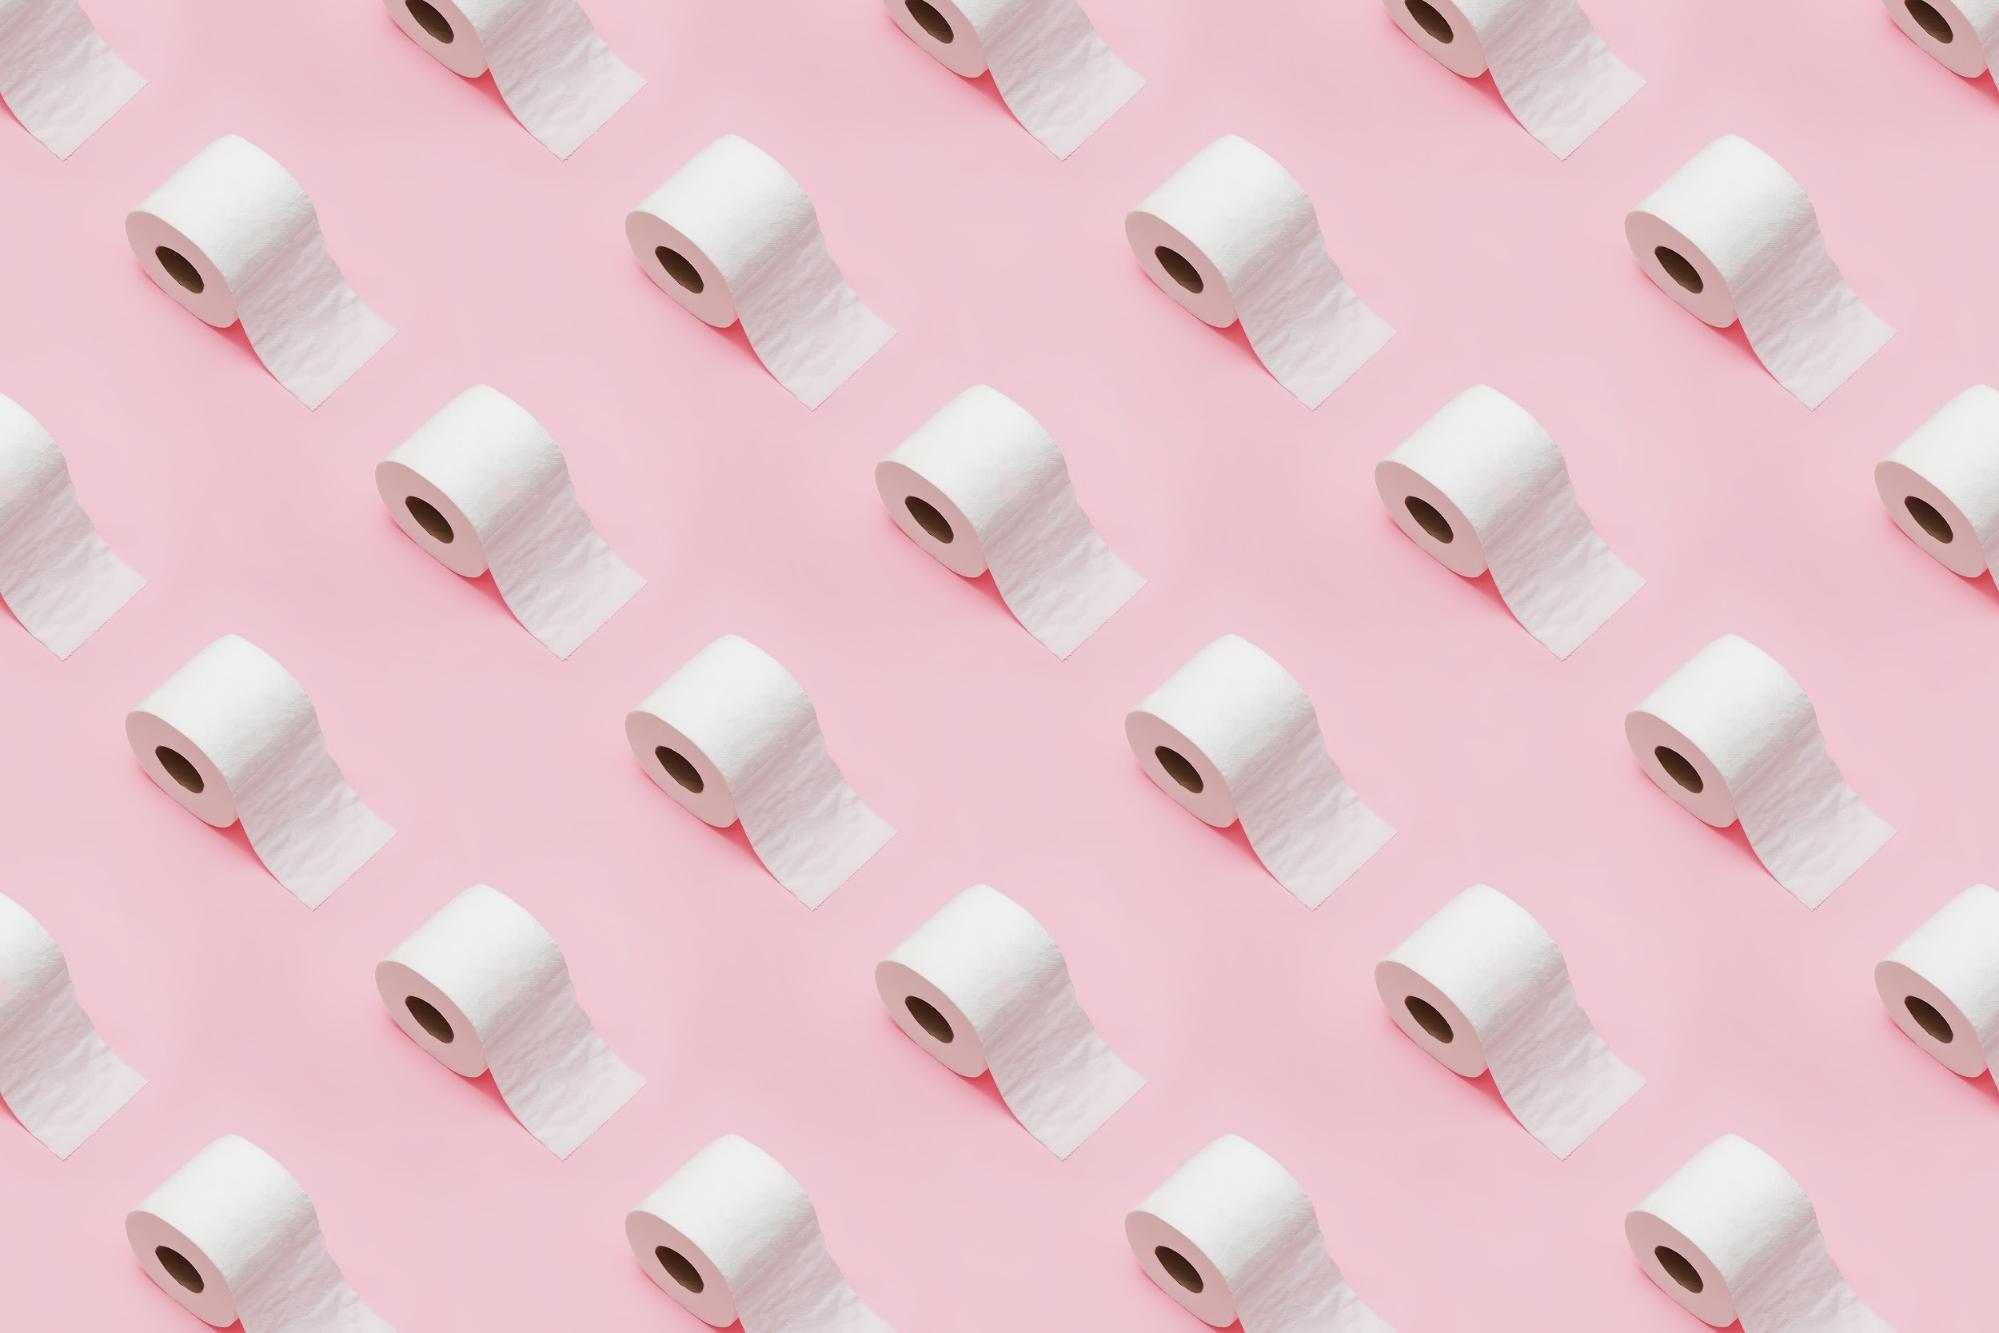 repeating rolls of toilet paper on pink background